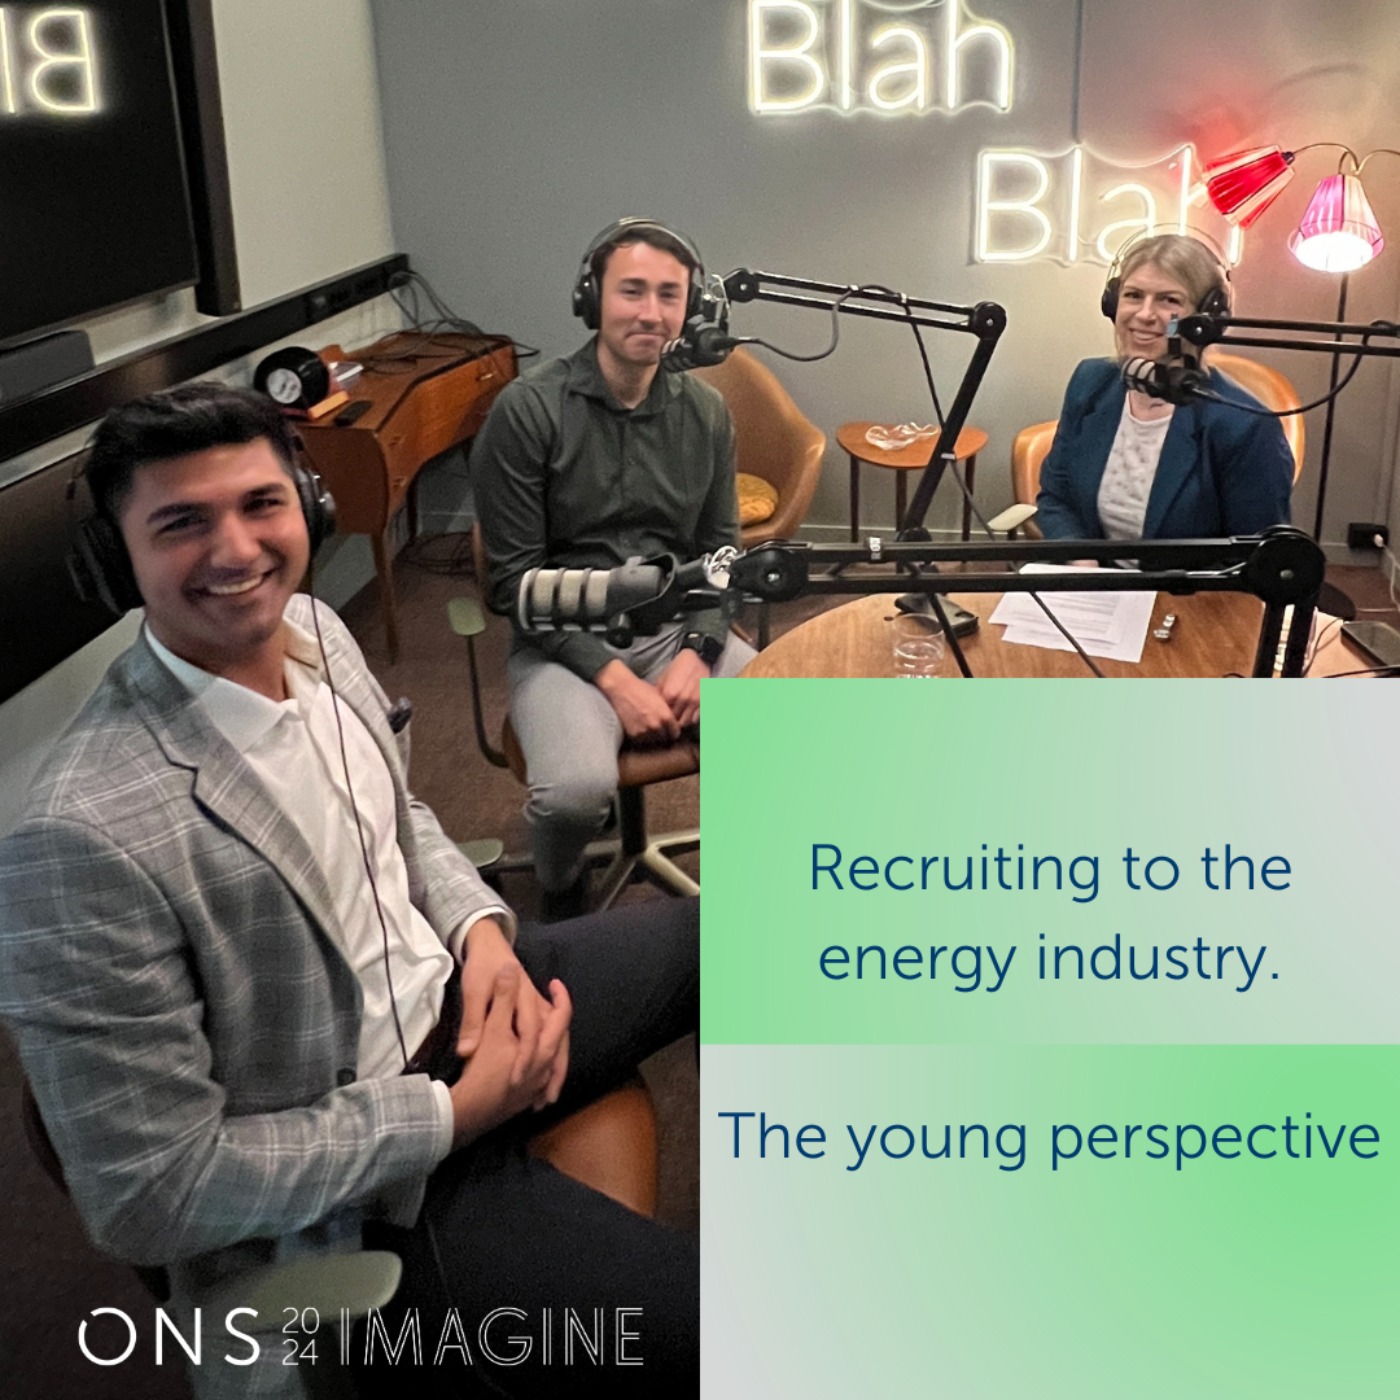 Recruiting to the energy industry - the young perspective